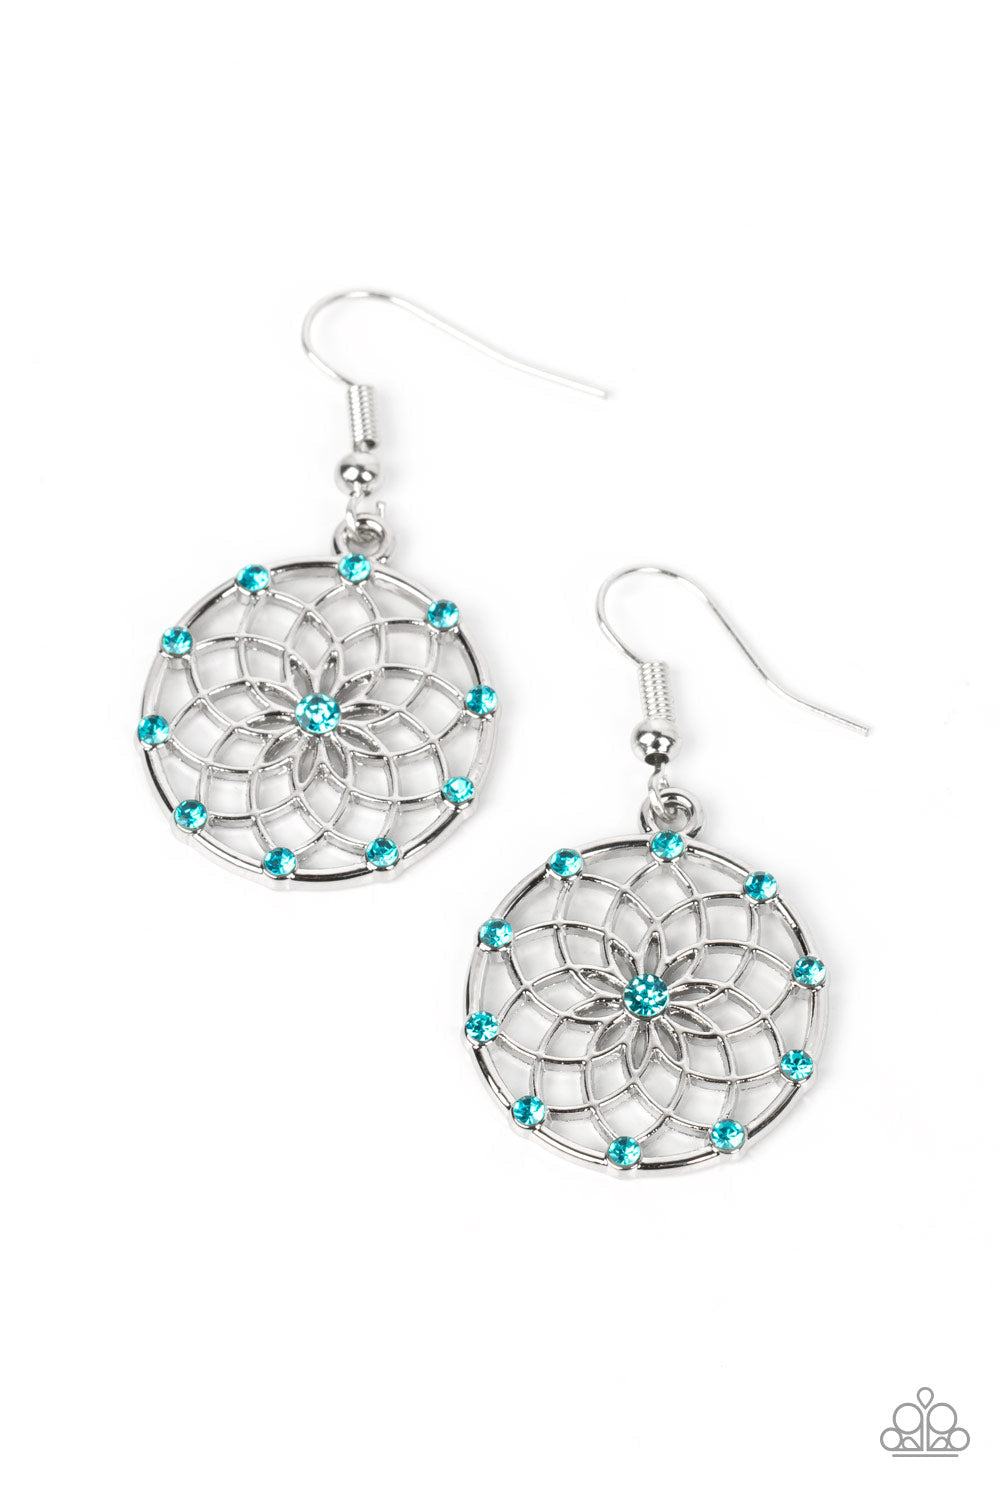 Springtime Salutations - Blue and Silver Earrings - Paparazzi Accessories - Dotted with dainty blue rhinestones, an airy mandala-like blossom blooms inside a silver hoop for a seasonal shimmer. Earring attaches to a standard fishhook fitting.